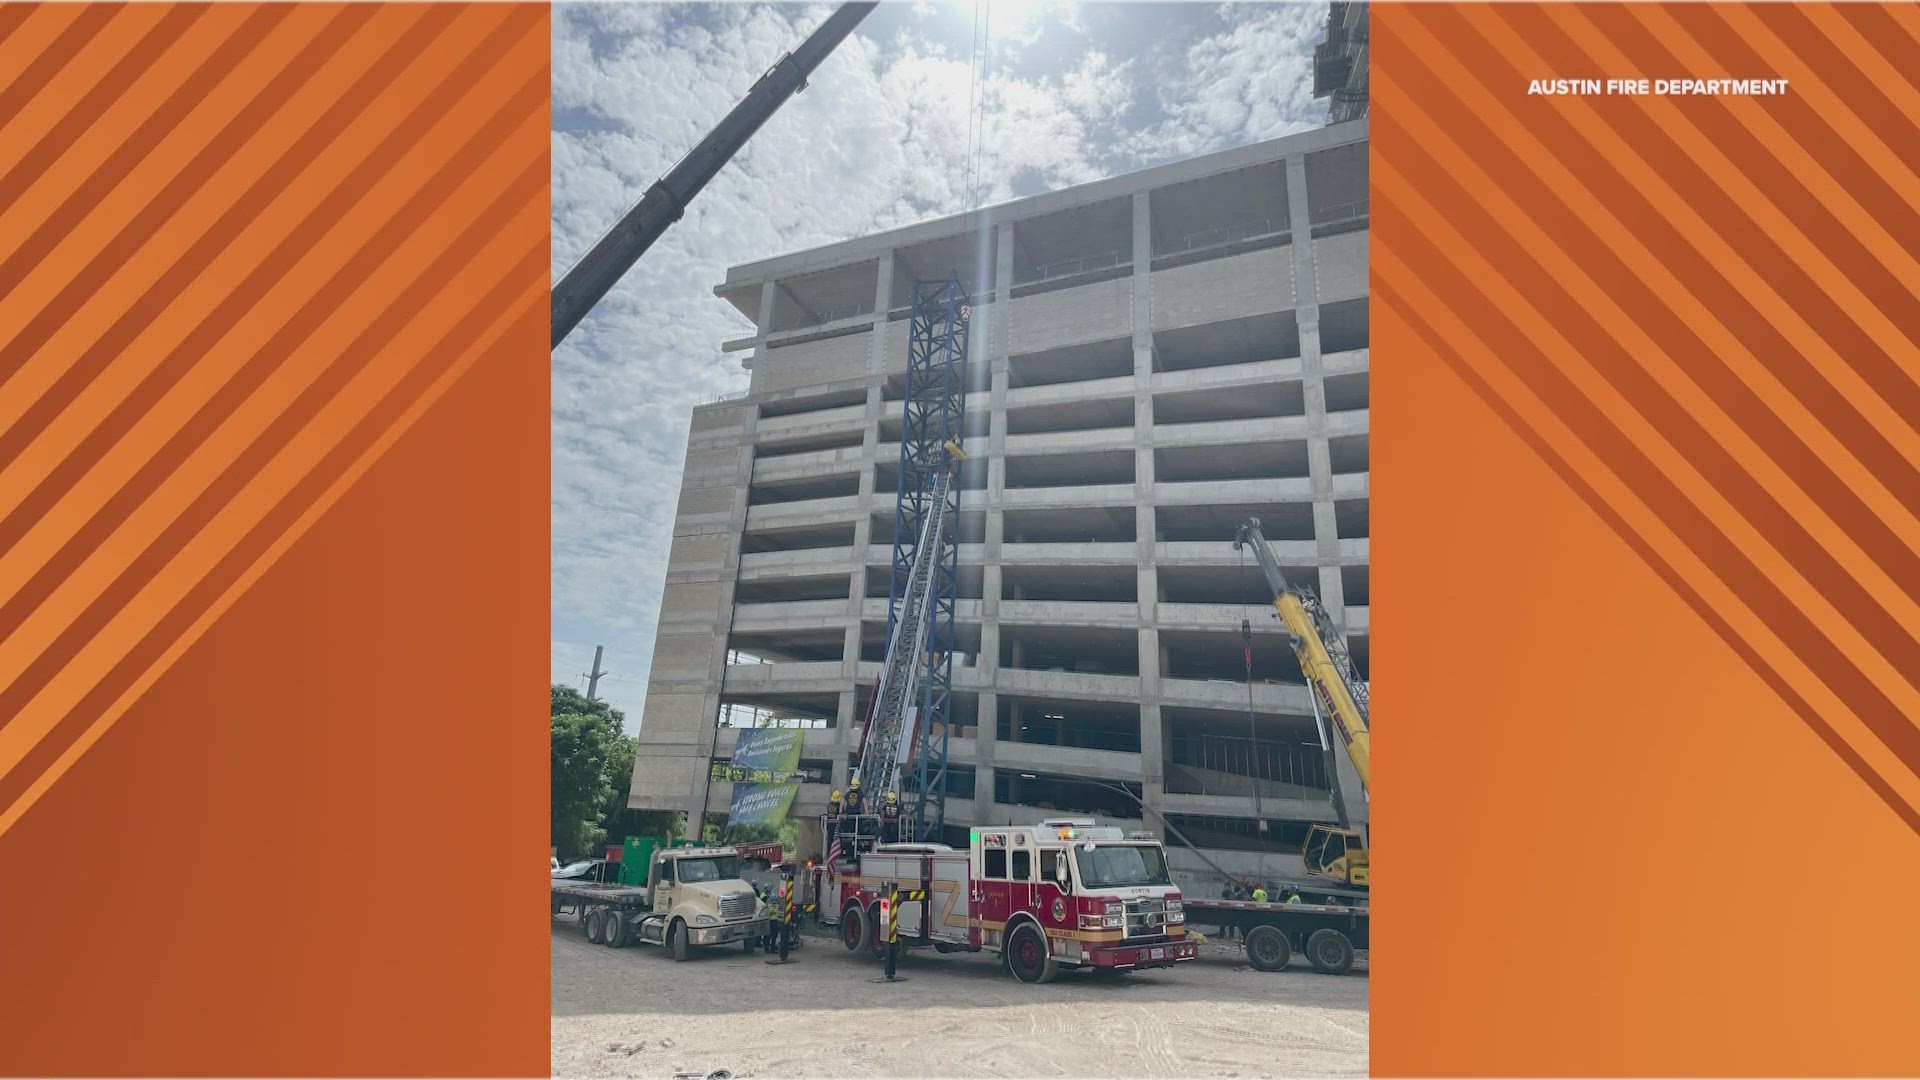 A construction worker was rescued from a crane scaffold in Downtown Austin on Sunday afternoon after experiencing heat-related issues.